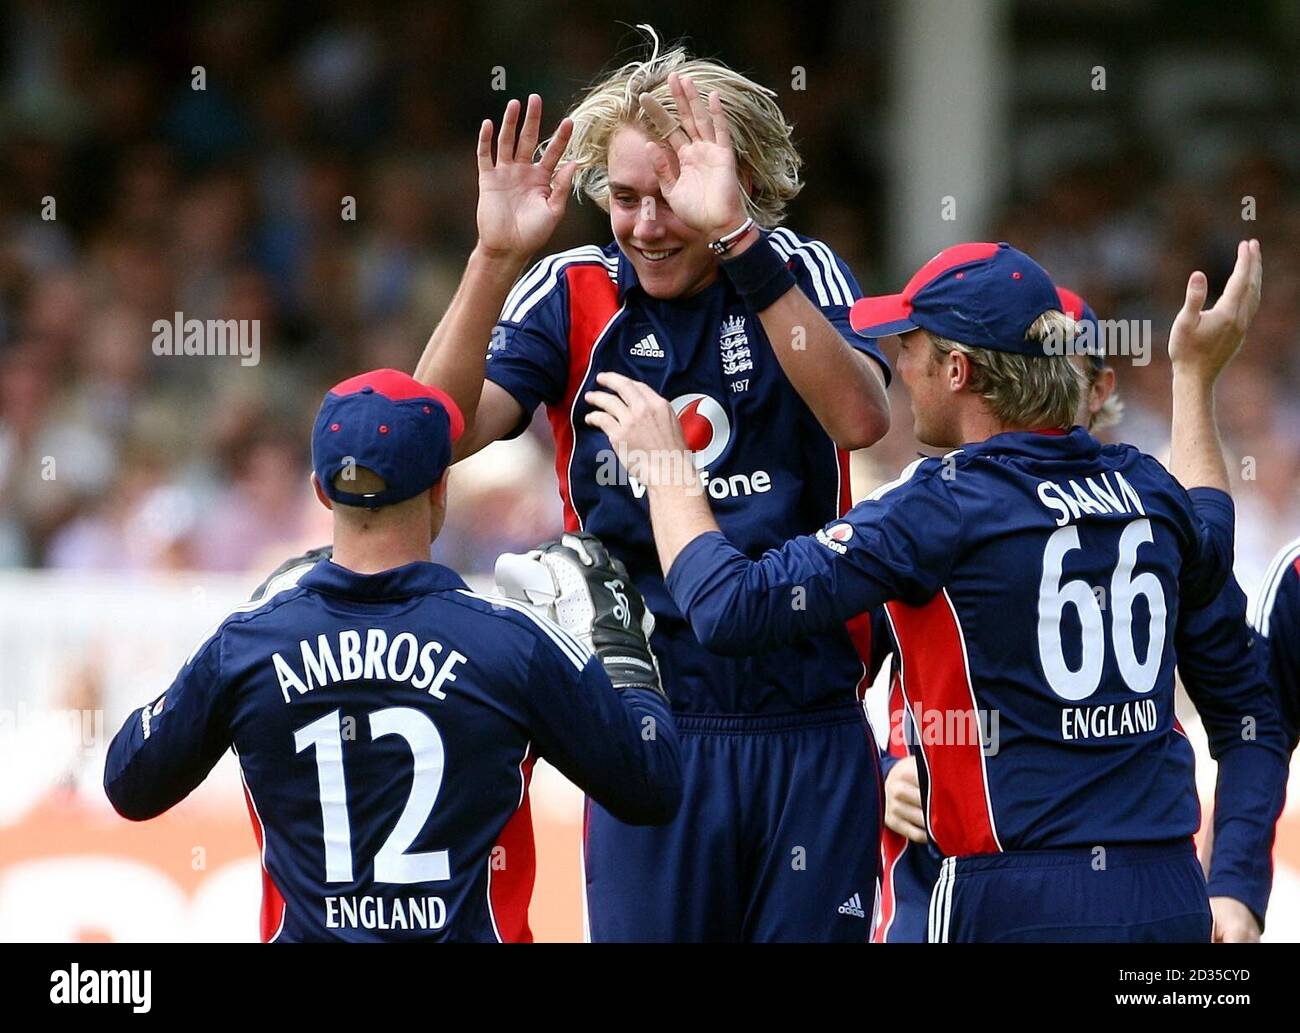 England's Stuart Broad celebrates taking the wicket of New Zealand's Ross Taylor with Tim Ambrose (left) during the NatWest Series One Day International at Lord's, London. Stock Photo